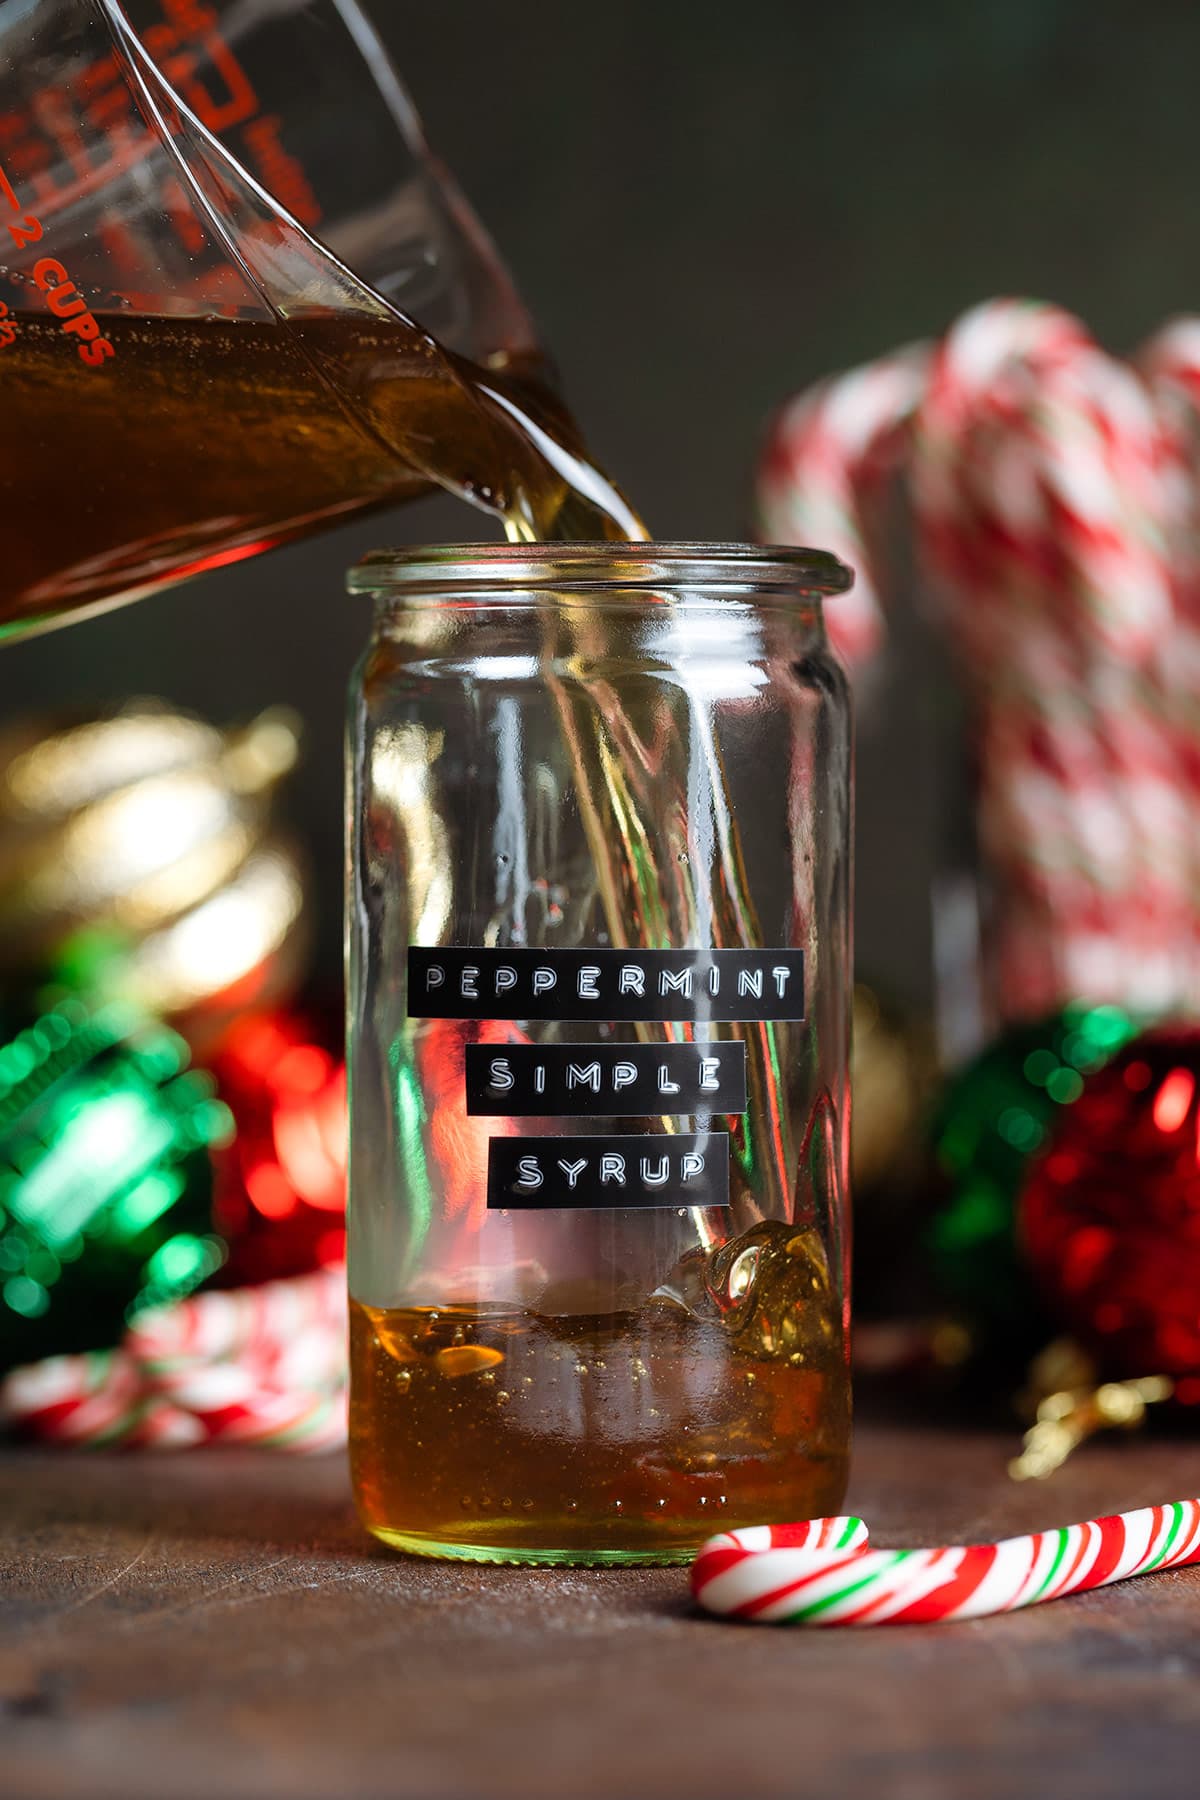 Golden syrup being poured into a glass jar with a black label that says peppermint simple syrup on the side with Christmas ornaments in the background.